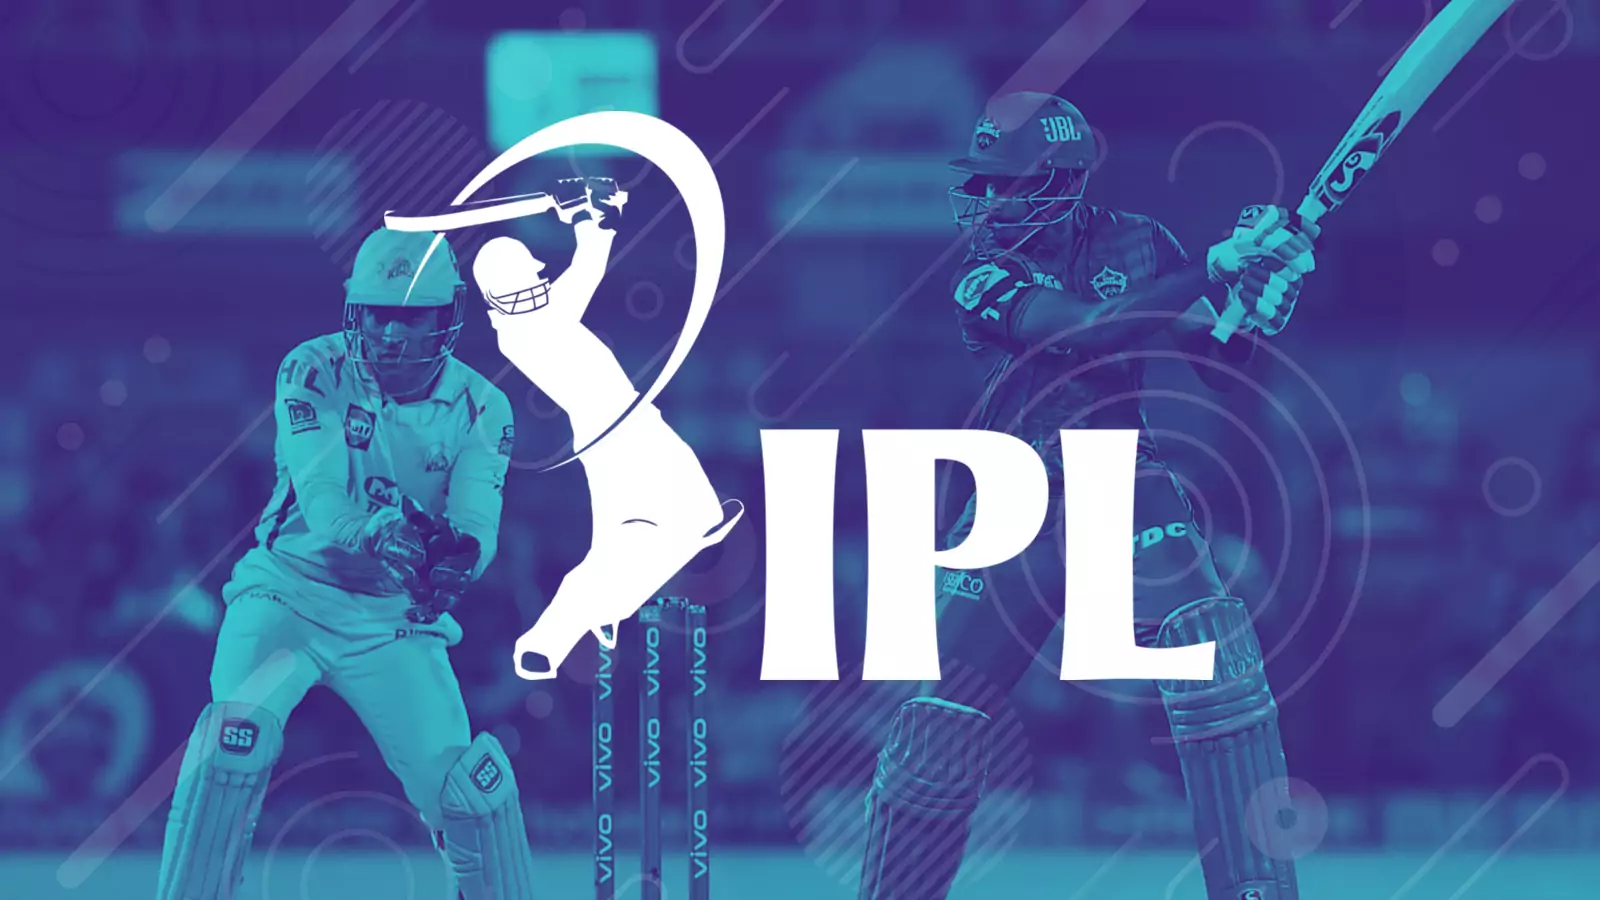 Learn more about IPL rules before starting to bet on its matches.